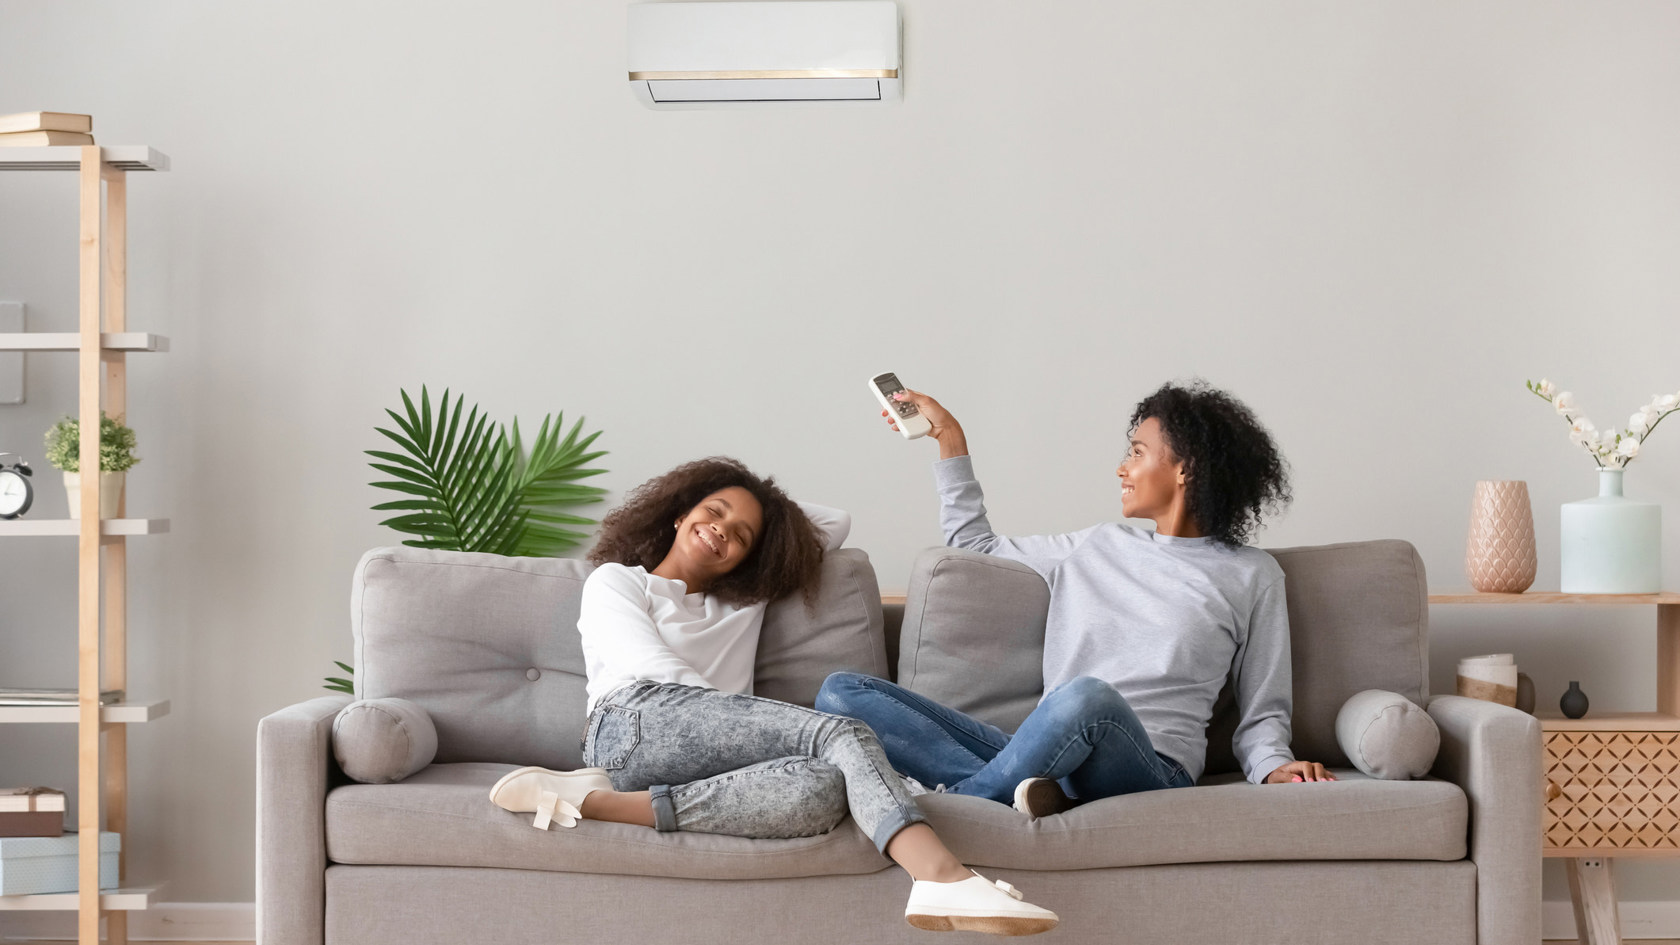 A mother and daughter sit on a couch in a modern home. The mother is operating her air conditioning unit with the remote.